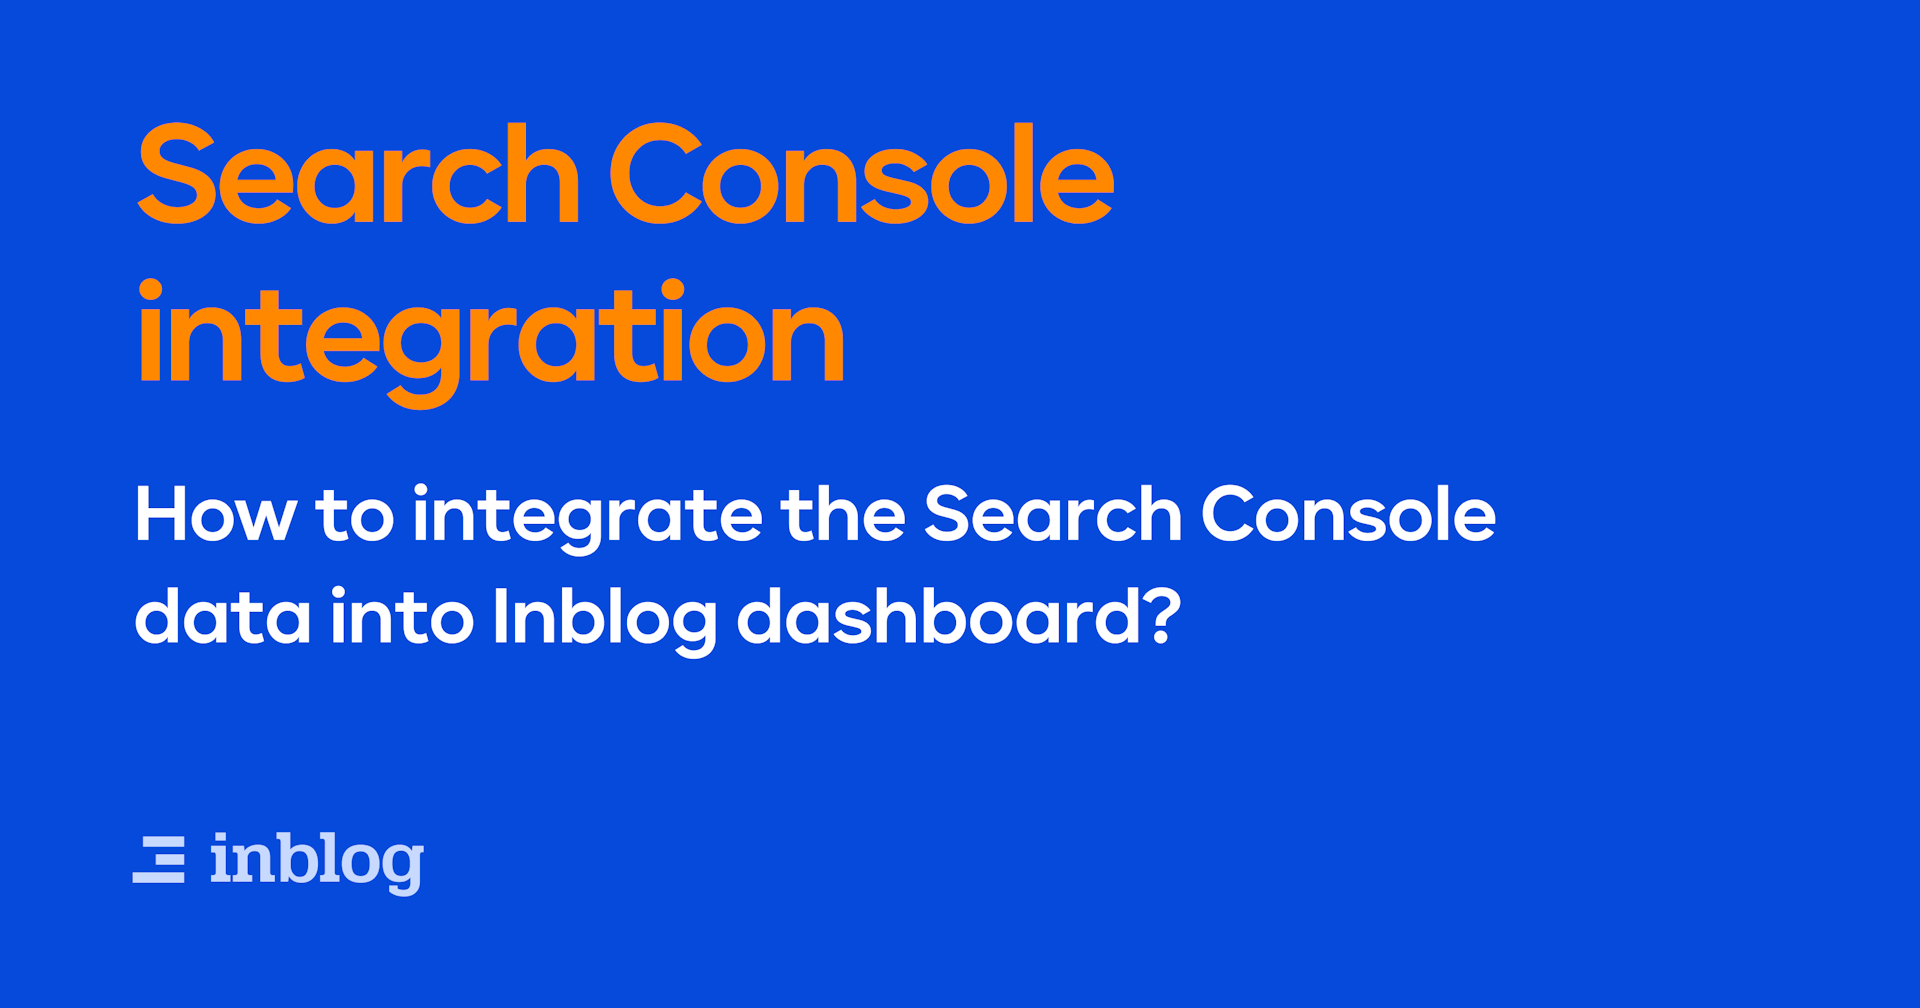 How to Search Console integration 101